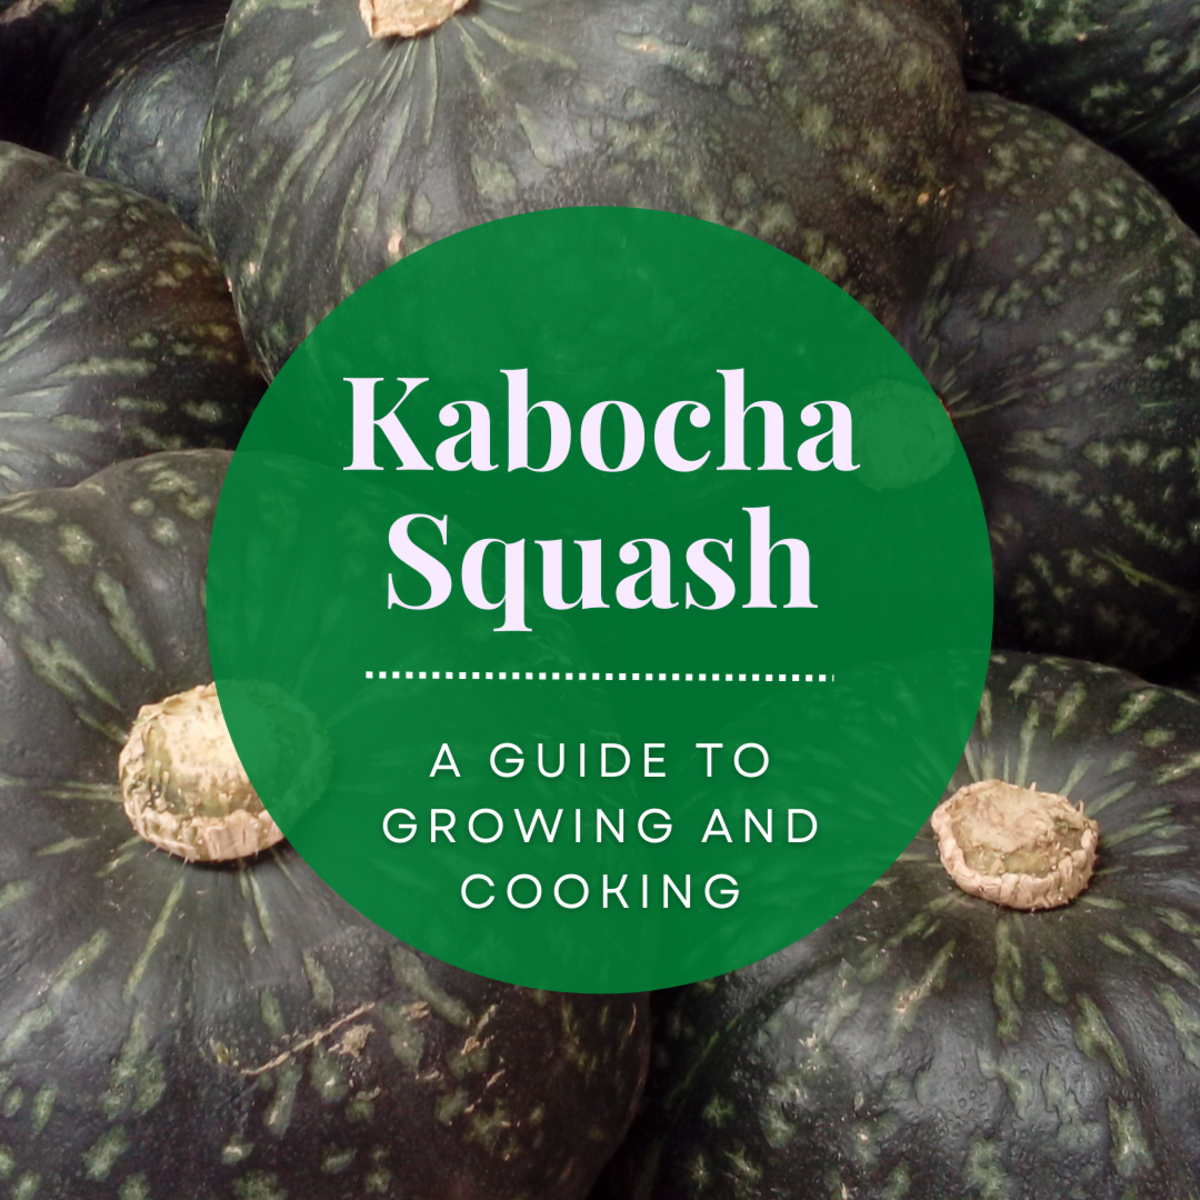 How to Grow Kabocha Squash and Prepare Its Flowers, Leaves, and Fruits for Consumption